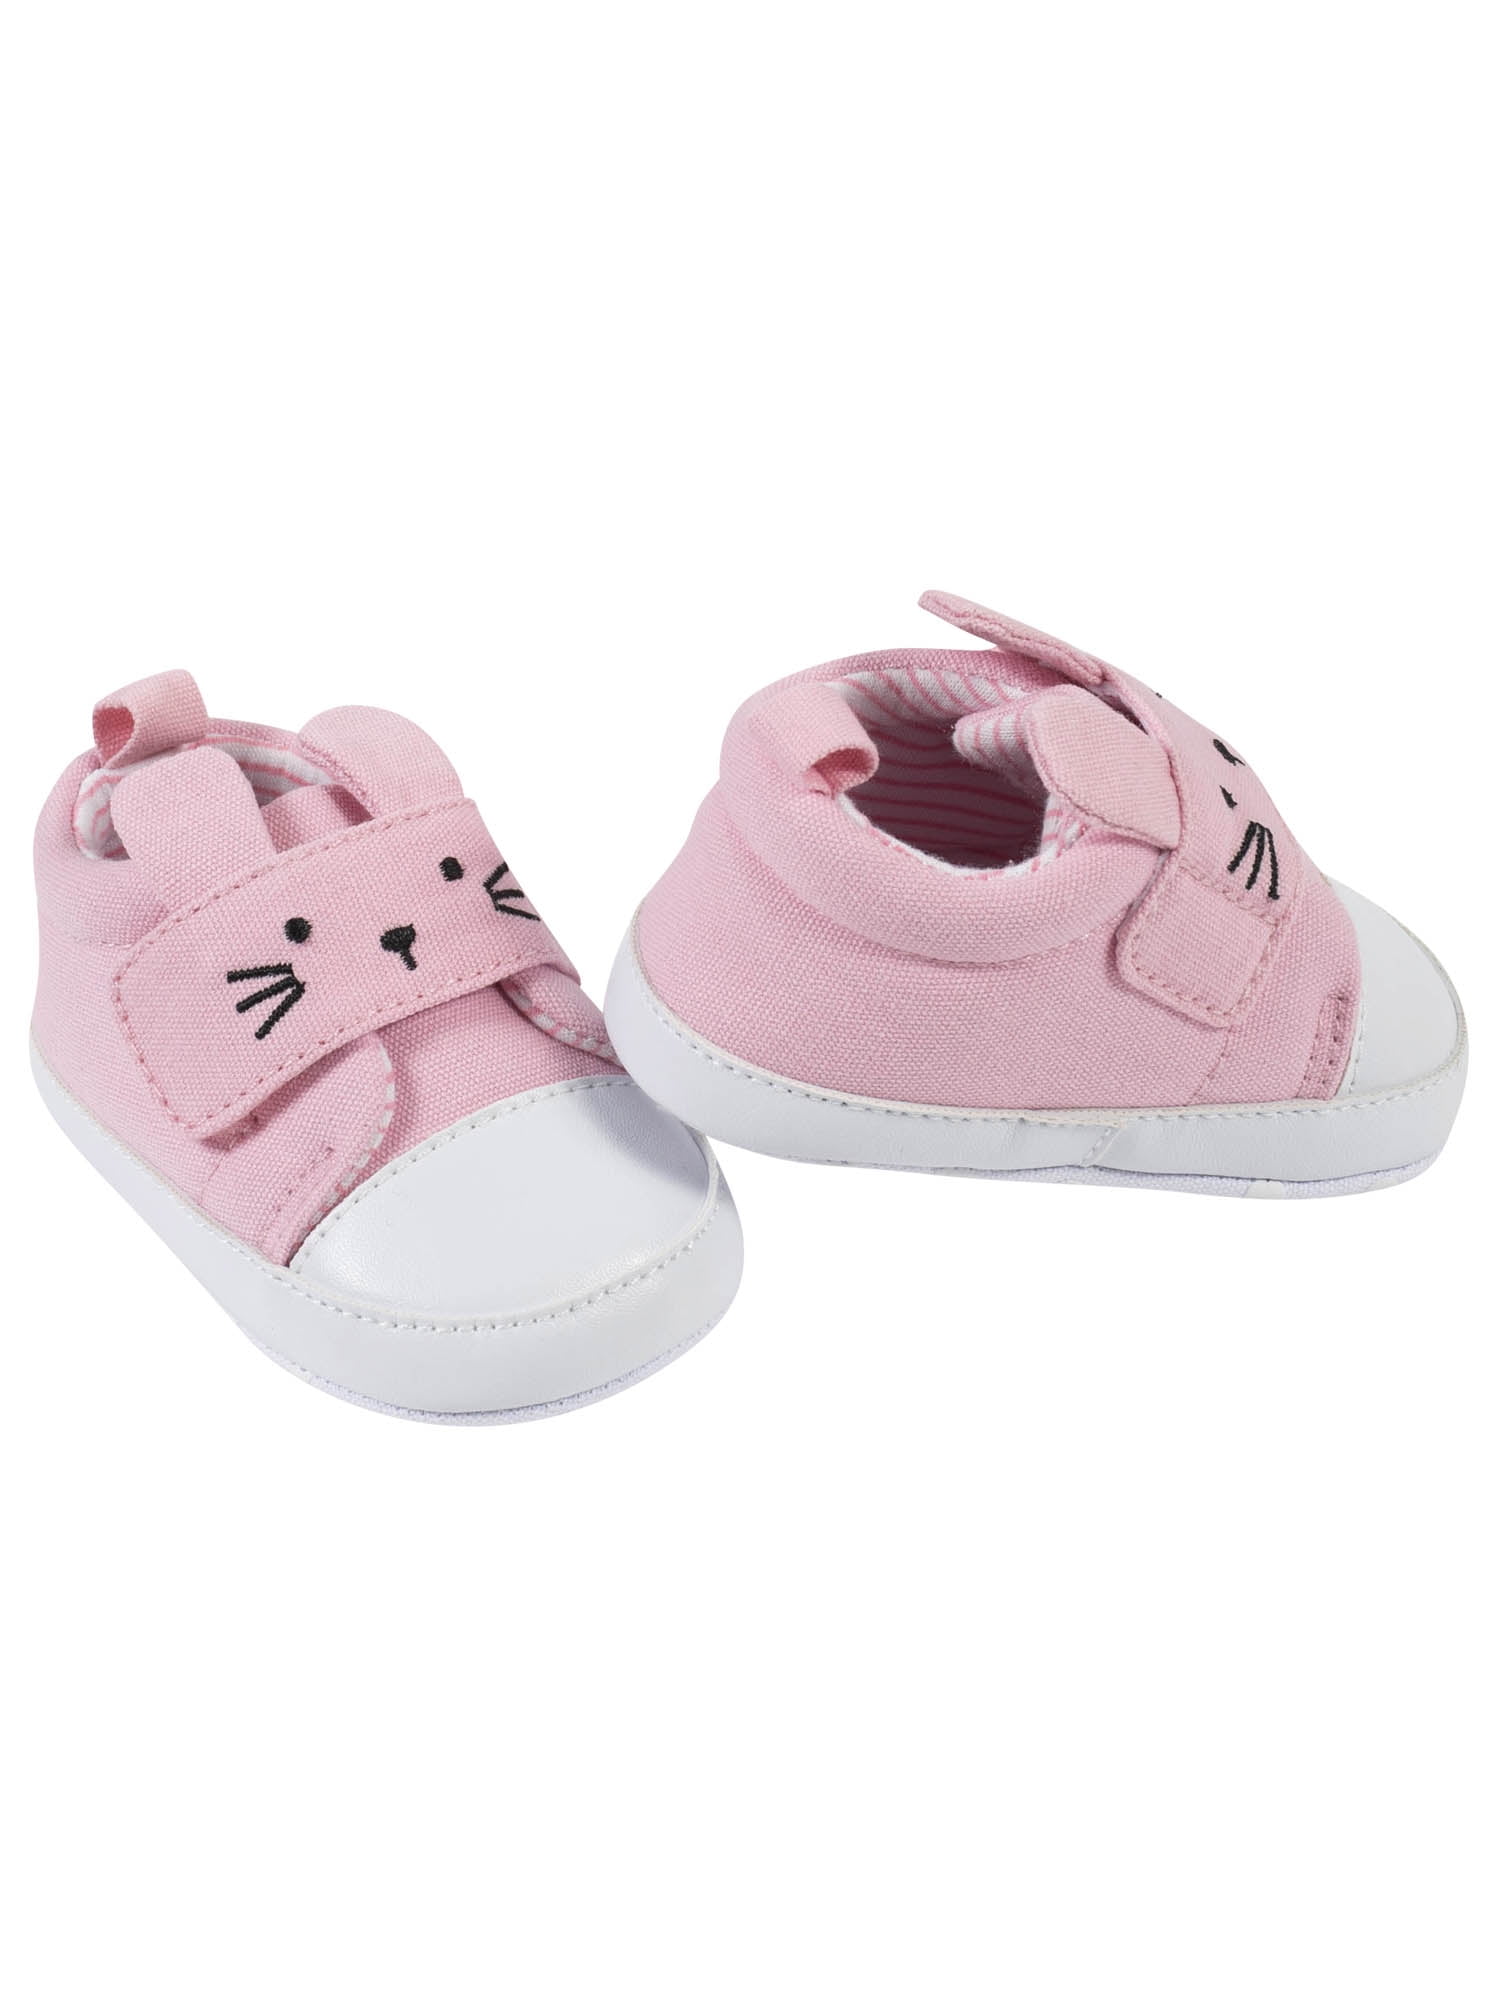 Skate Infant Baby sneakers Crochet Sport Boy Girl Newborn to 9 Months Shoes 